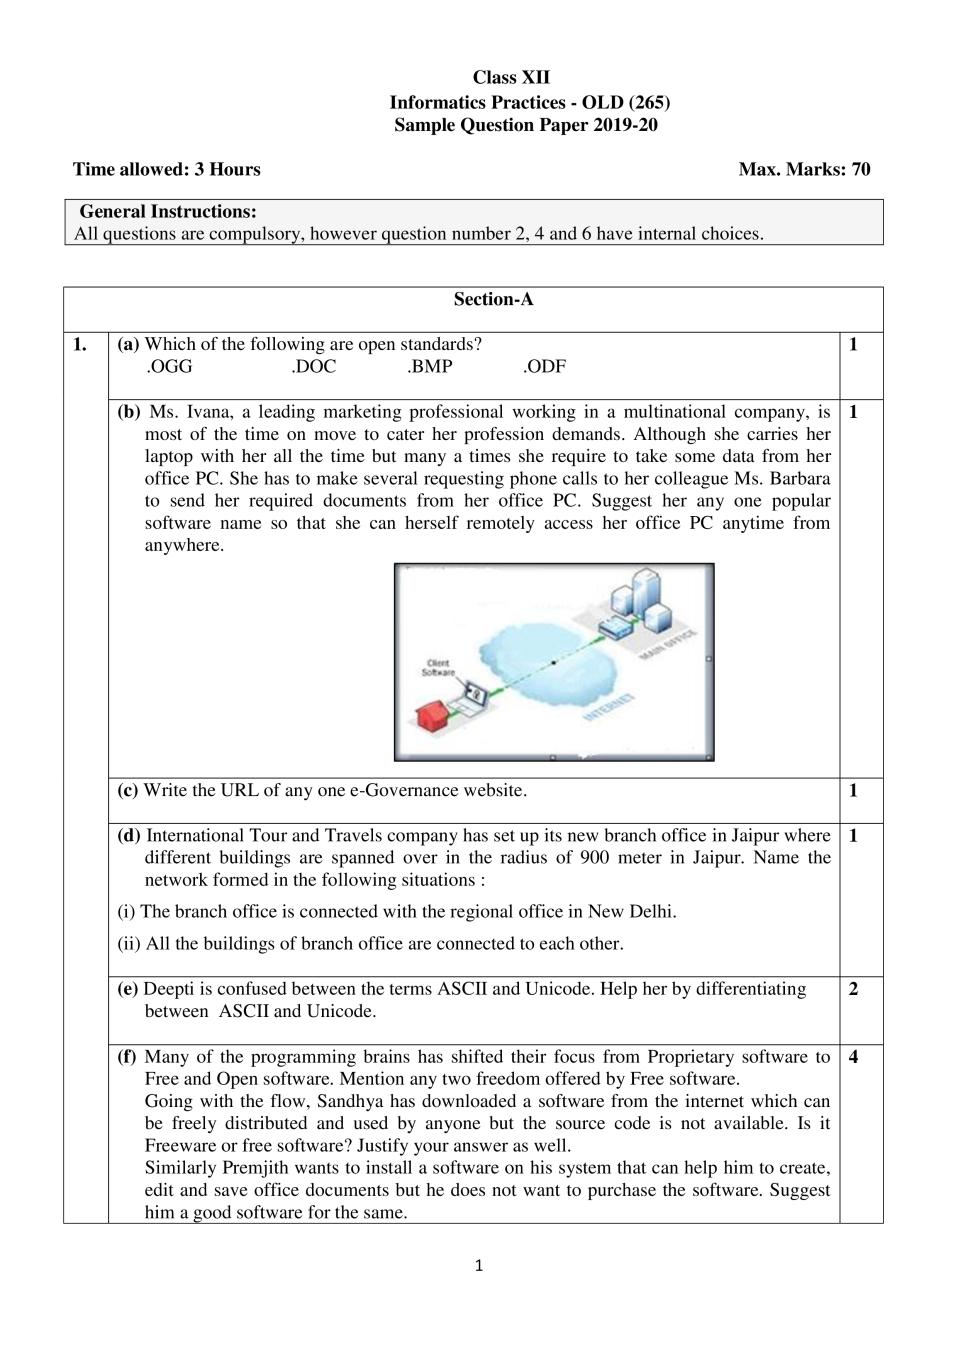 CBSE Class 12 Sample Paper 2020 for Informatics Practices Old - Page 1